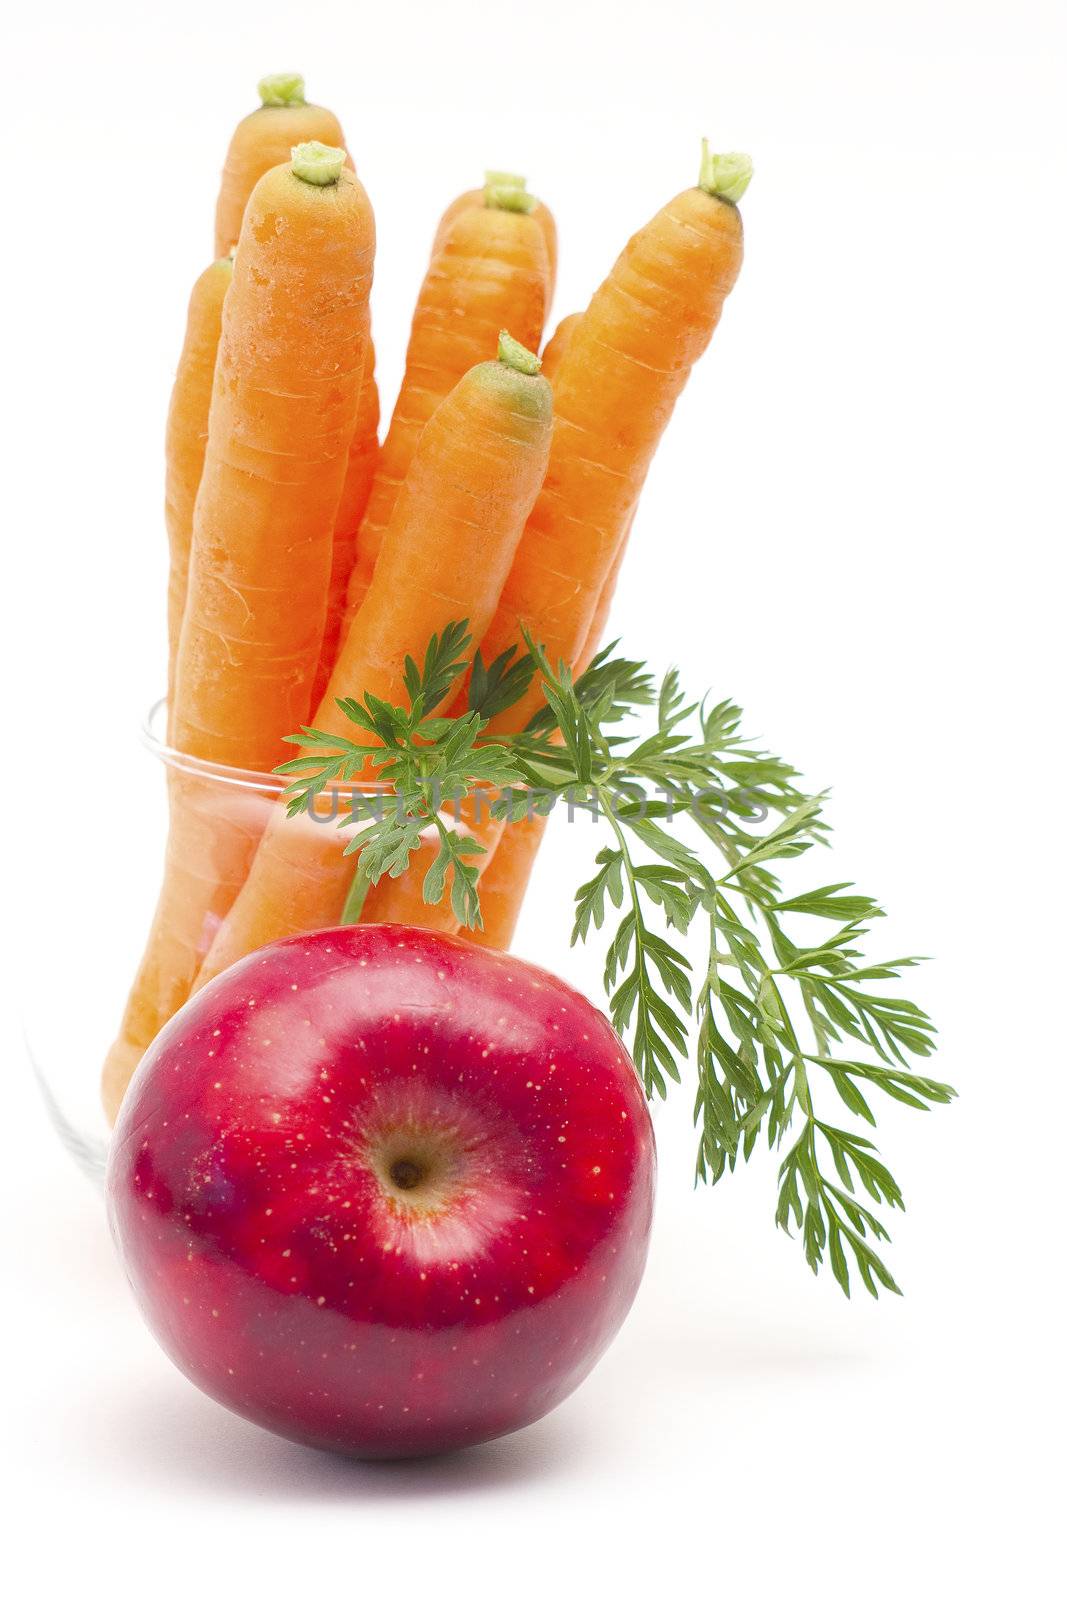 fresh apple and carrots